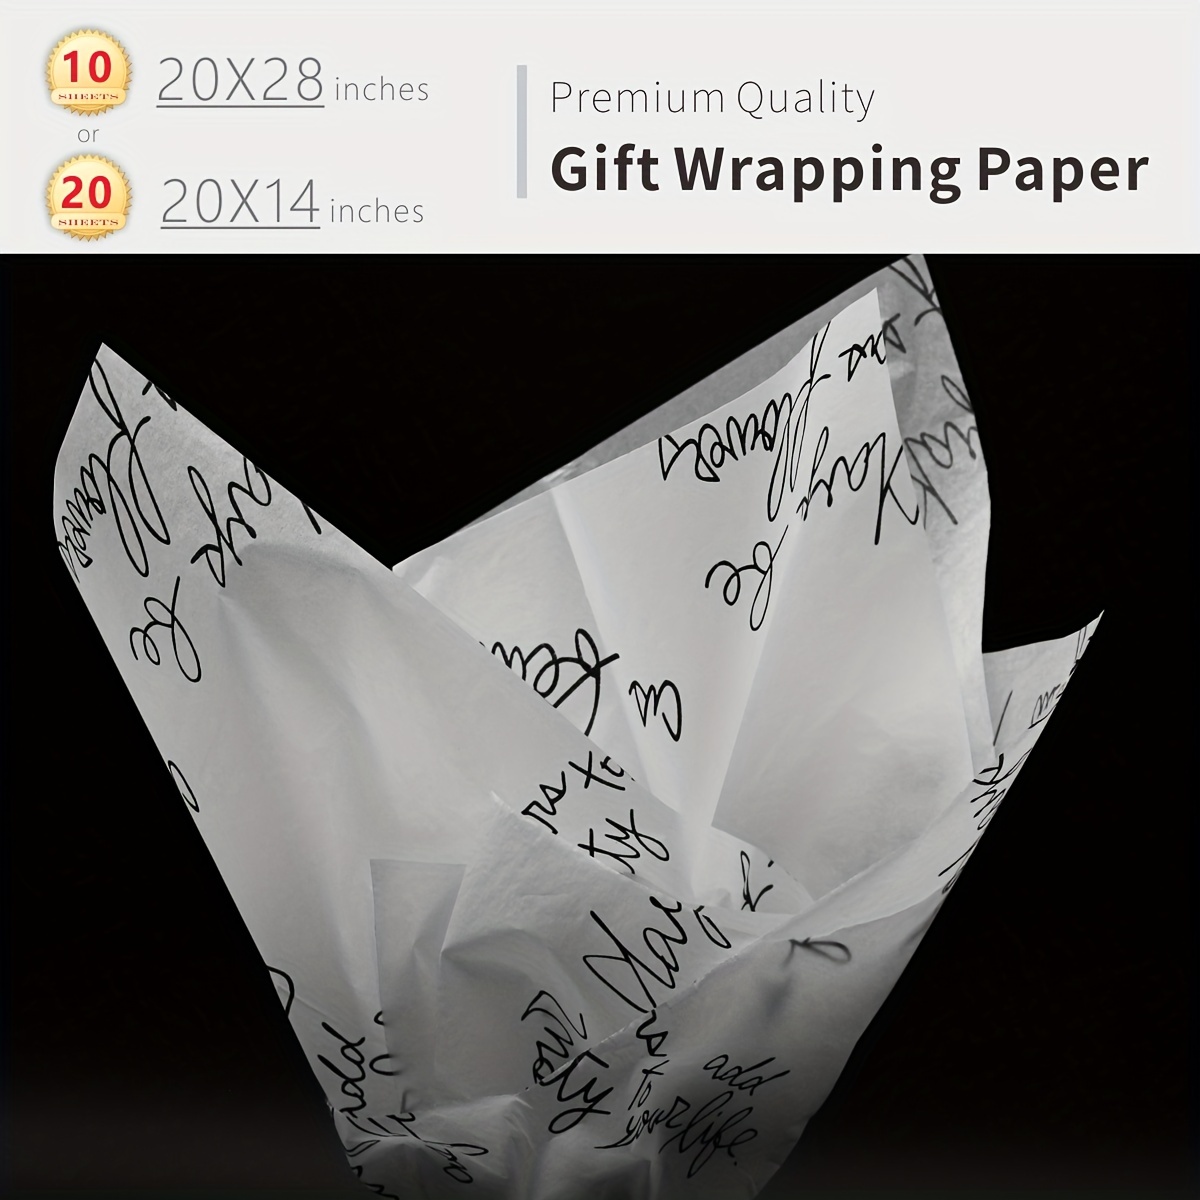 Wrapping Paper Craft, Crepe Paper Crafts